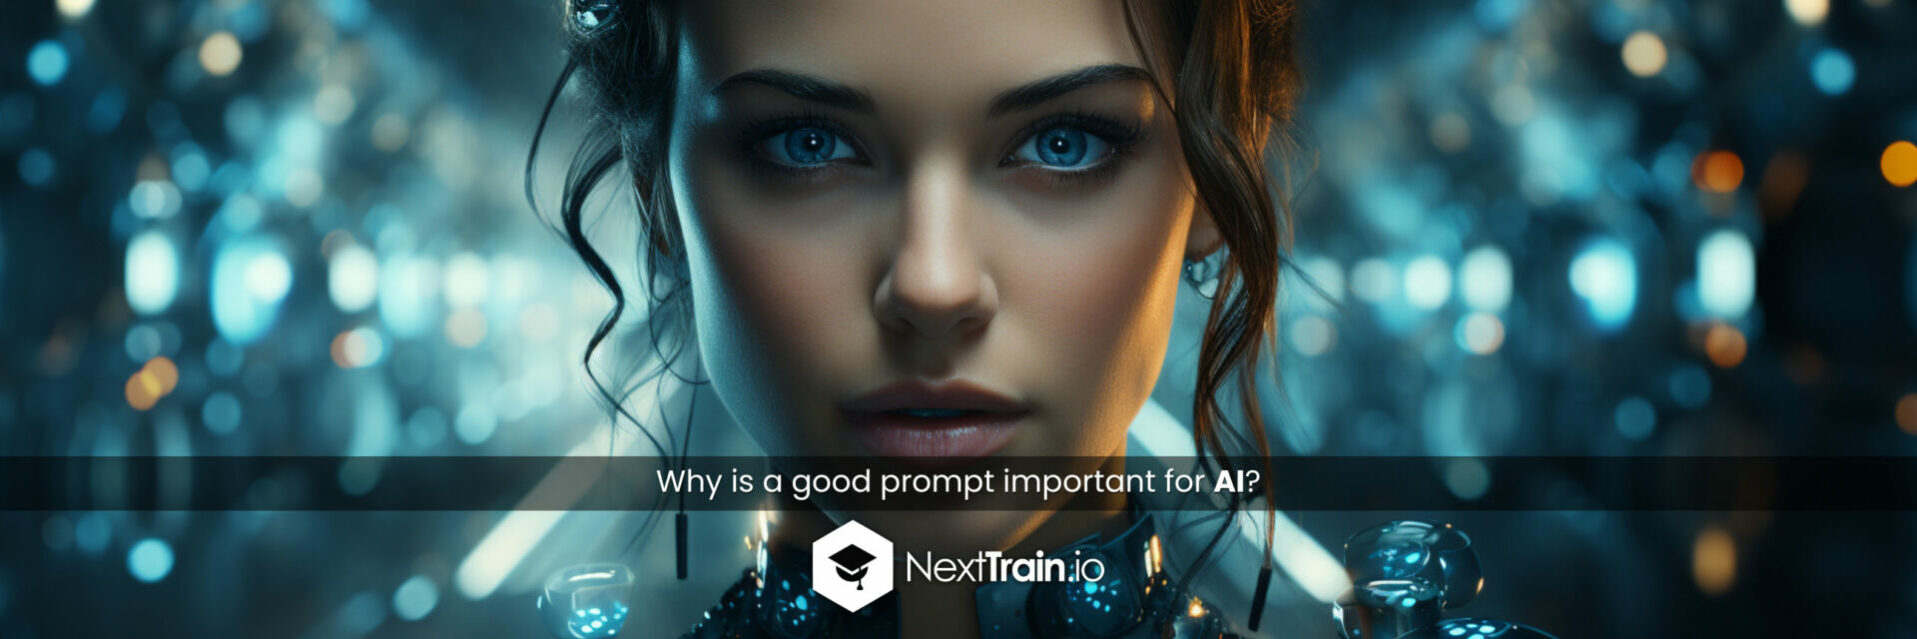 Why is a good prompt important for AI?